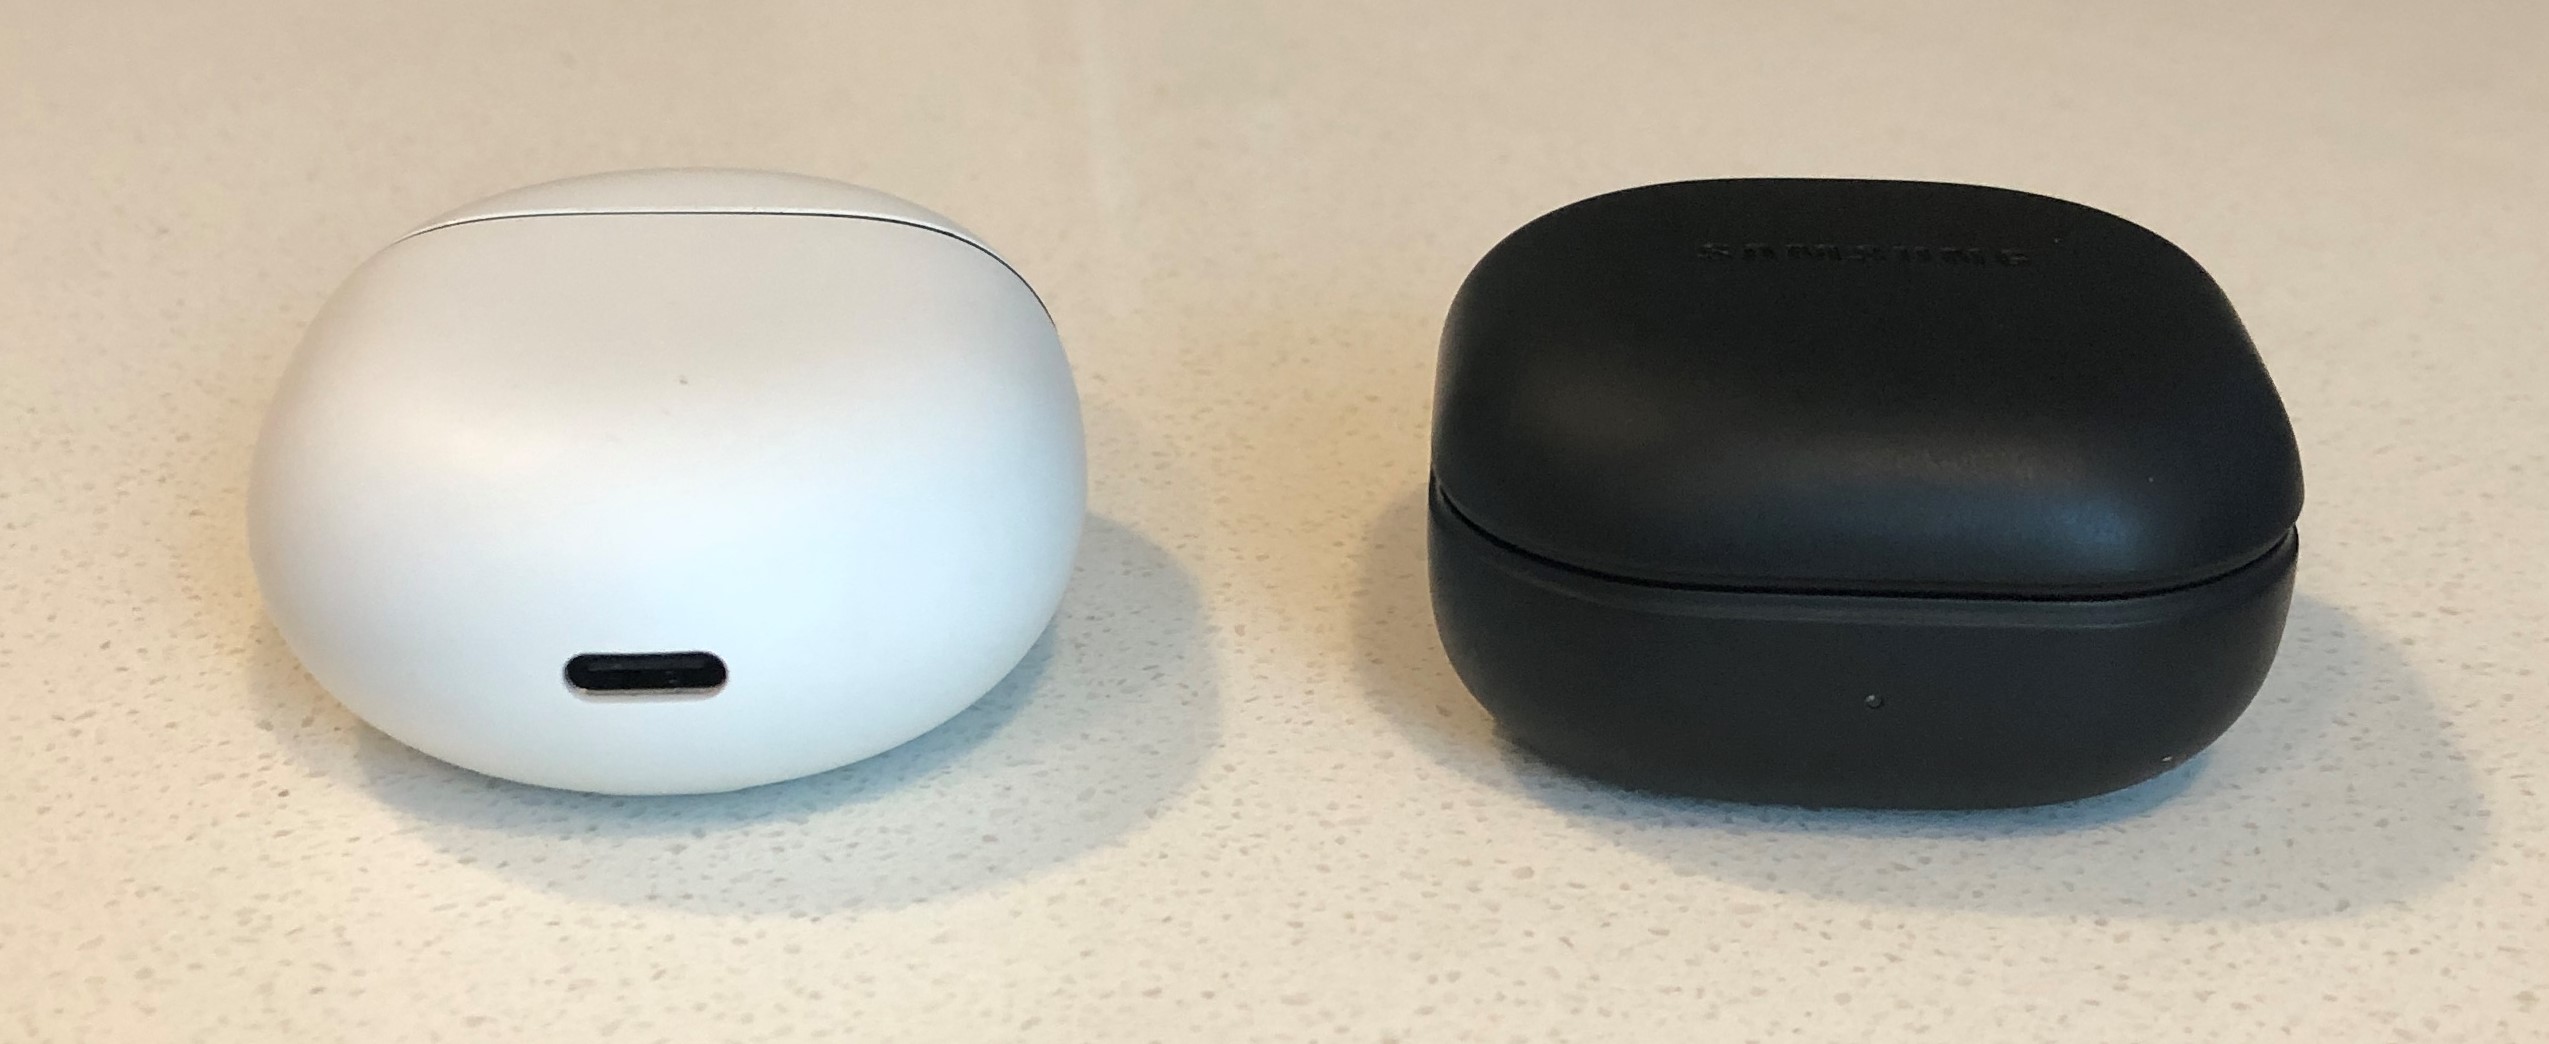 Google Pixel Buds Pro vs Samsung Galaxy Buds2 Pro charging and carrying case side